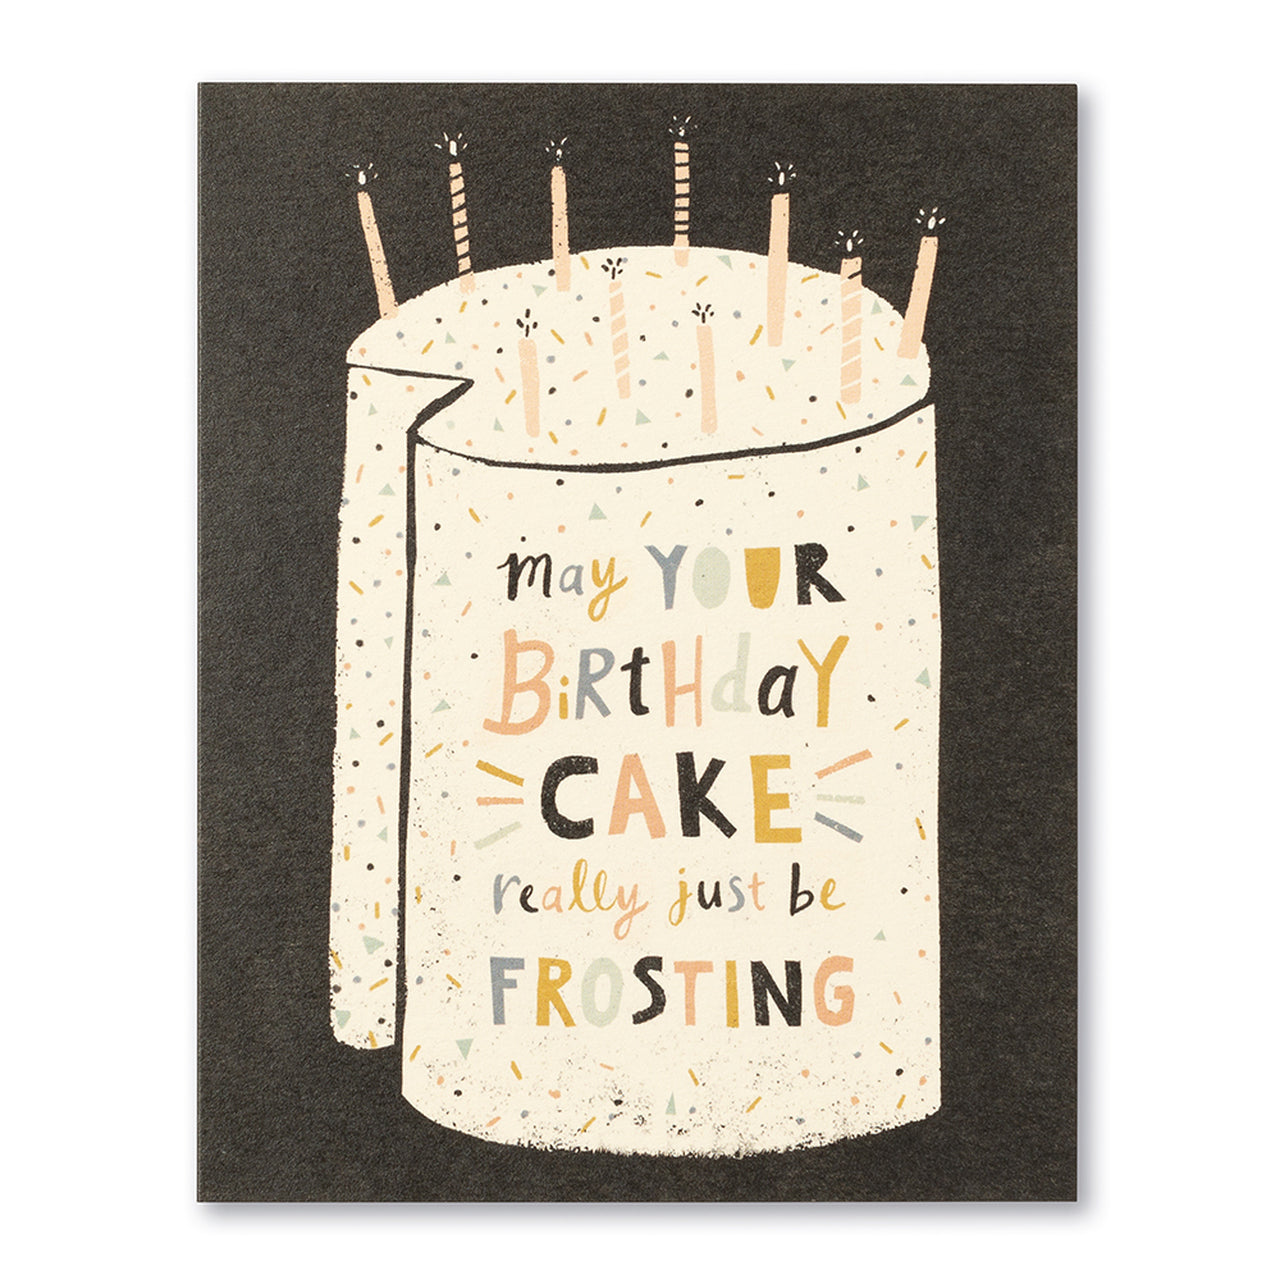 Frosting Cake Card